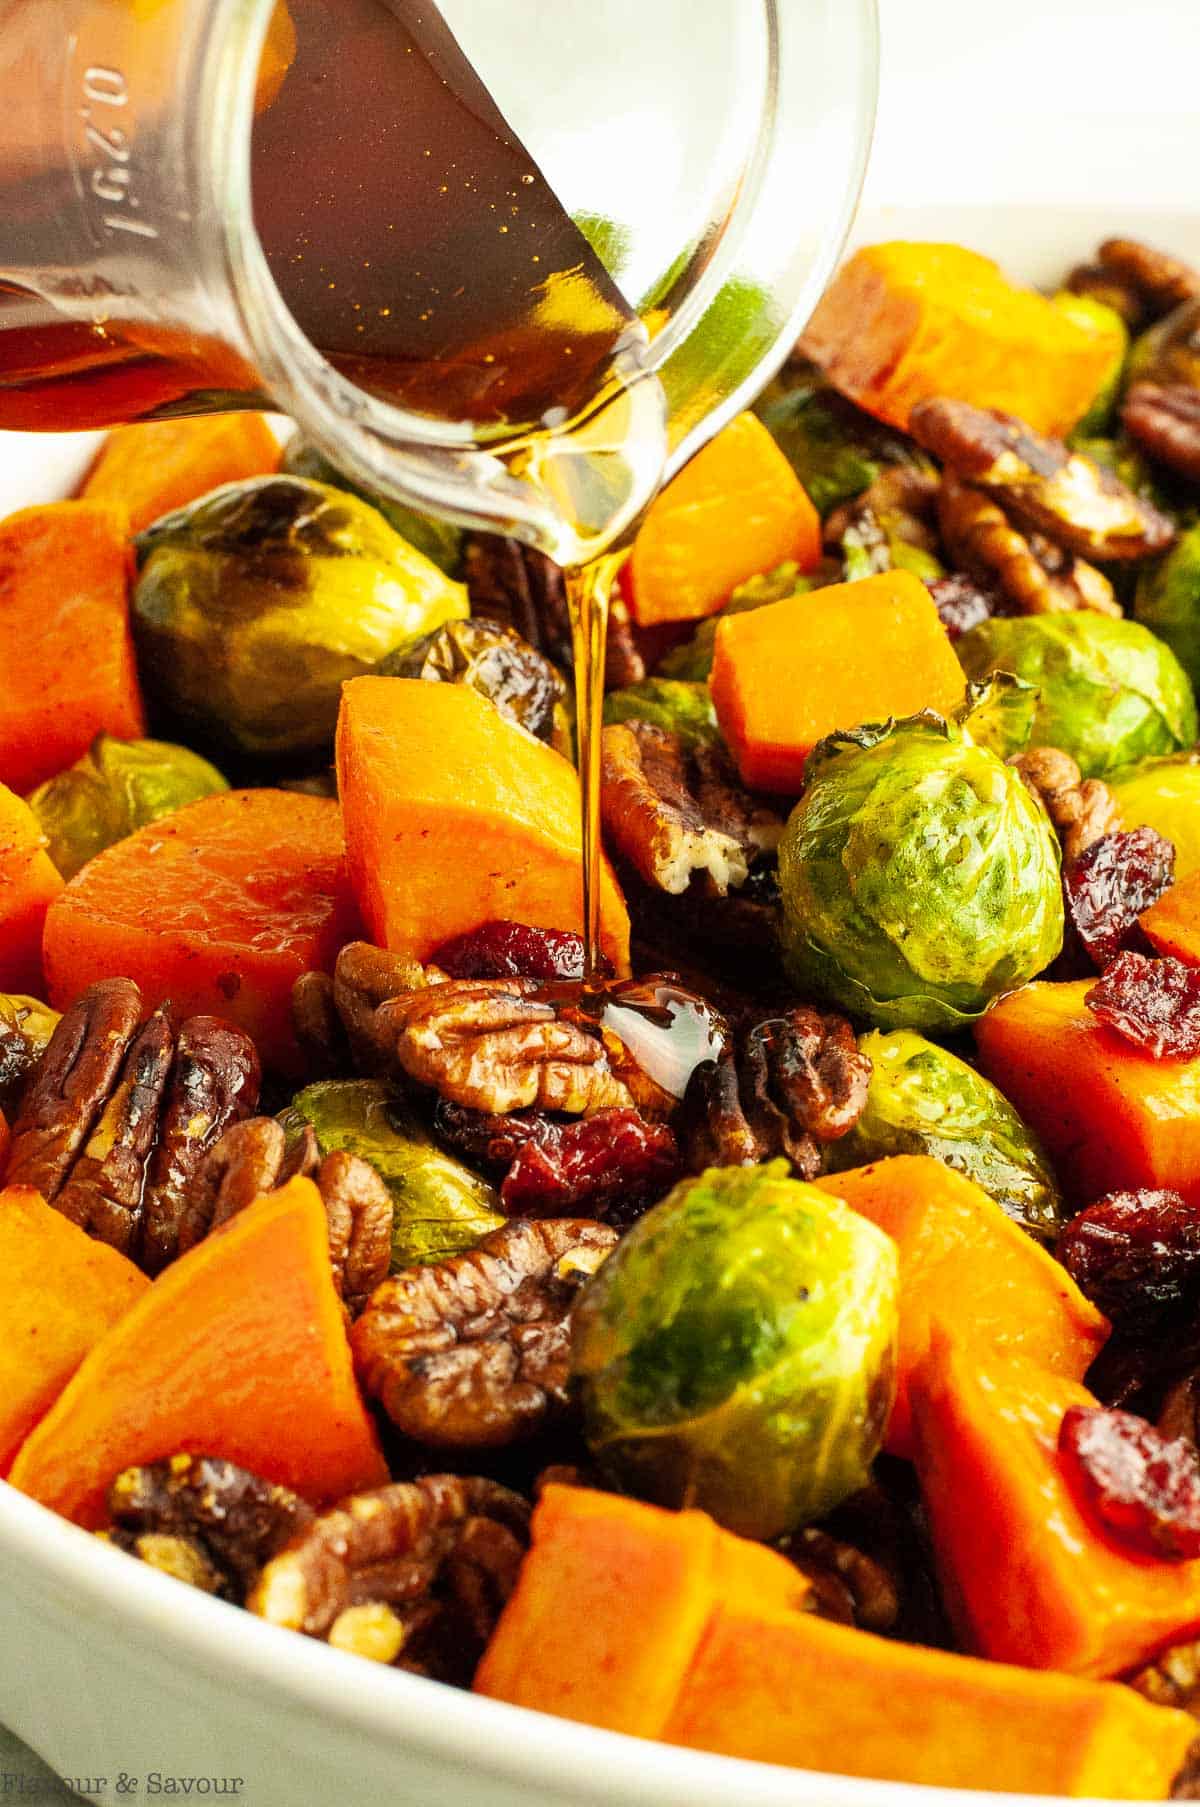 Drizzling maple syrup on roasted sprouts and sweet potatoes